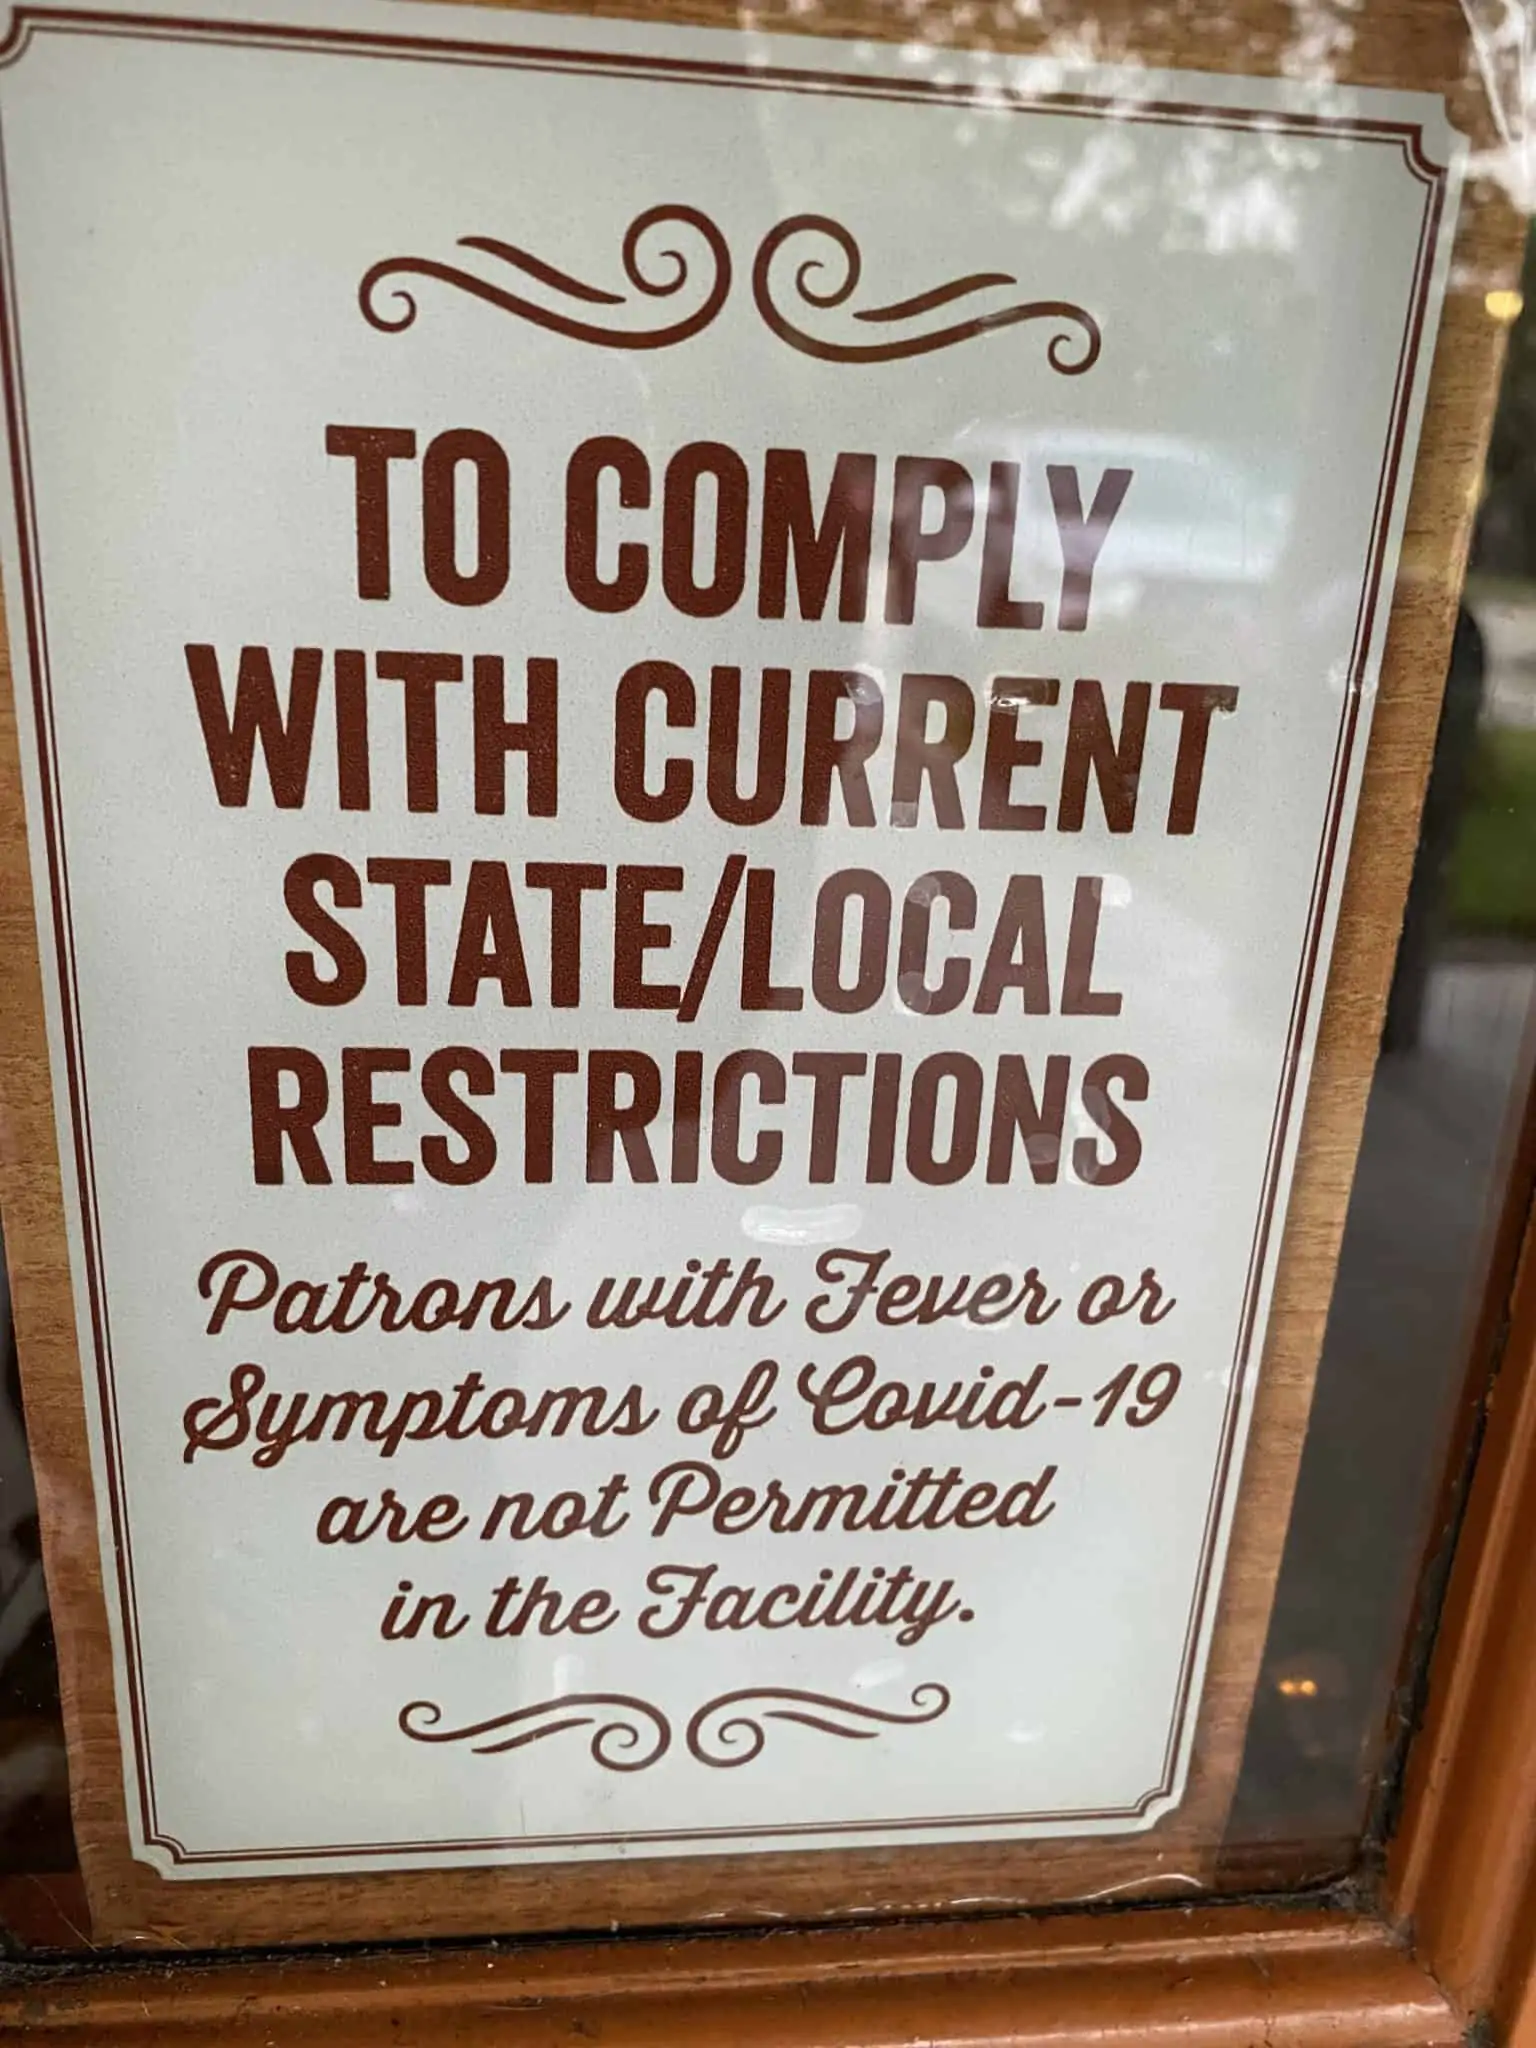 cracker barrel dining during a pandemic